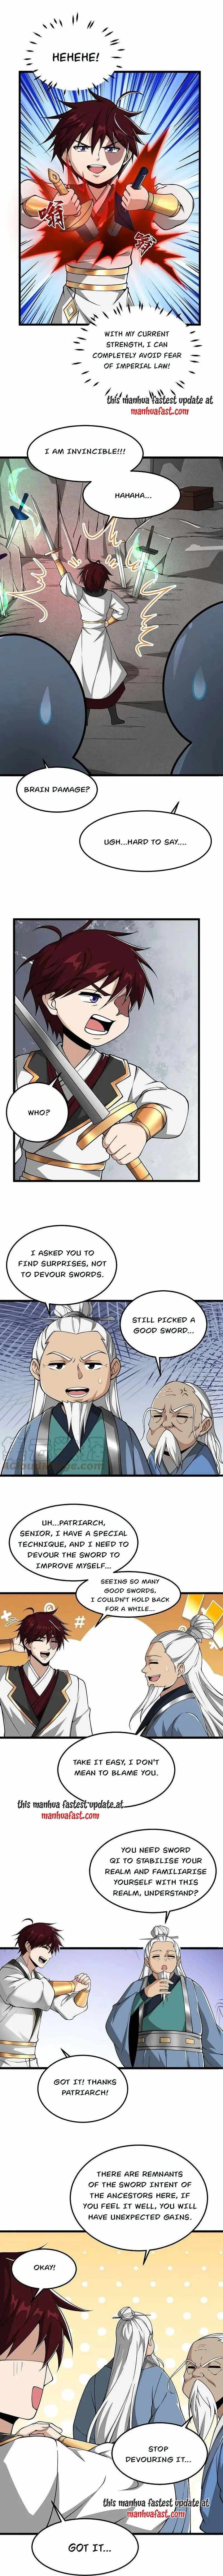 One Sword Reigns Supreme Chapter 312 Page 2